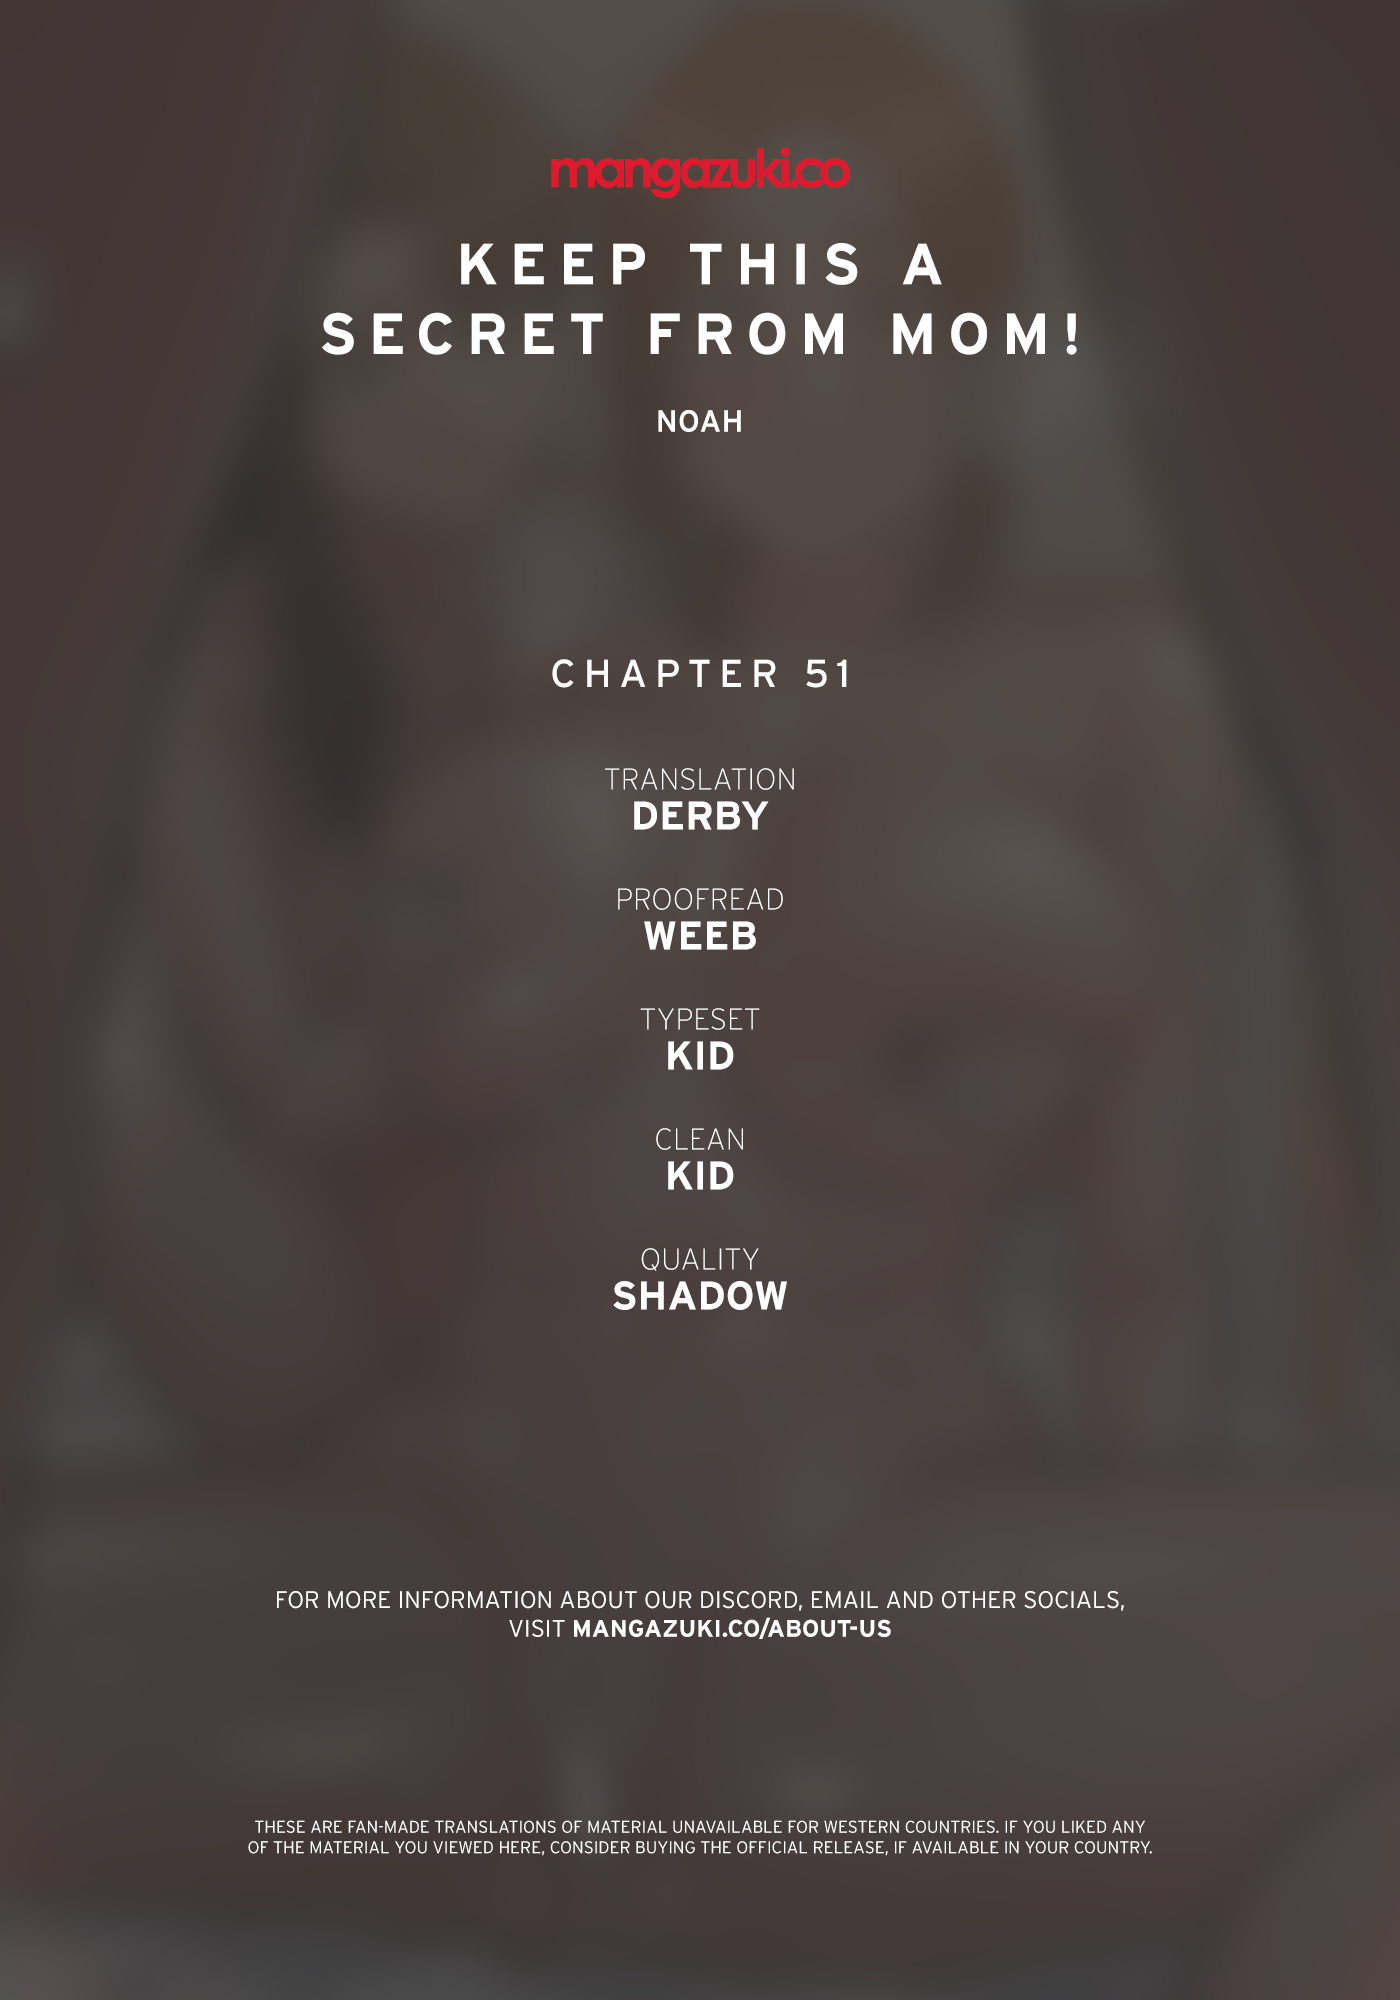 Keep This a Secret From Mom! image